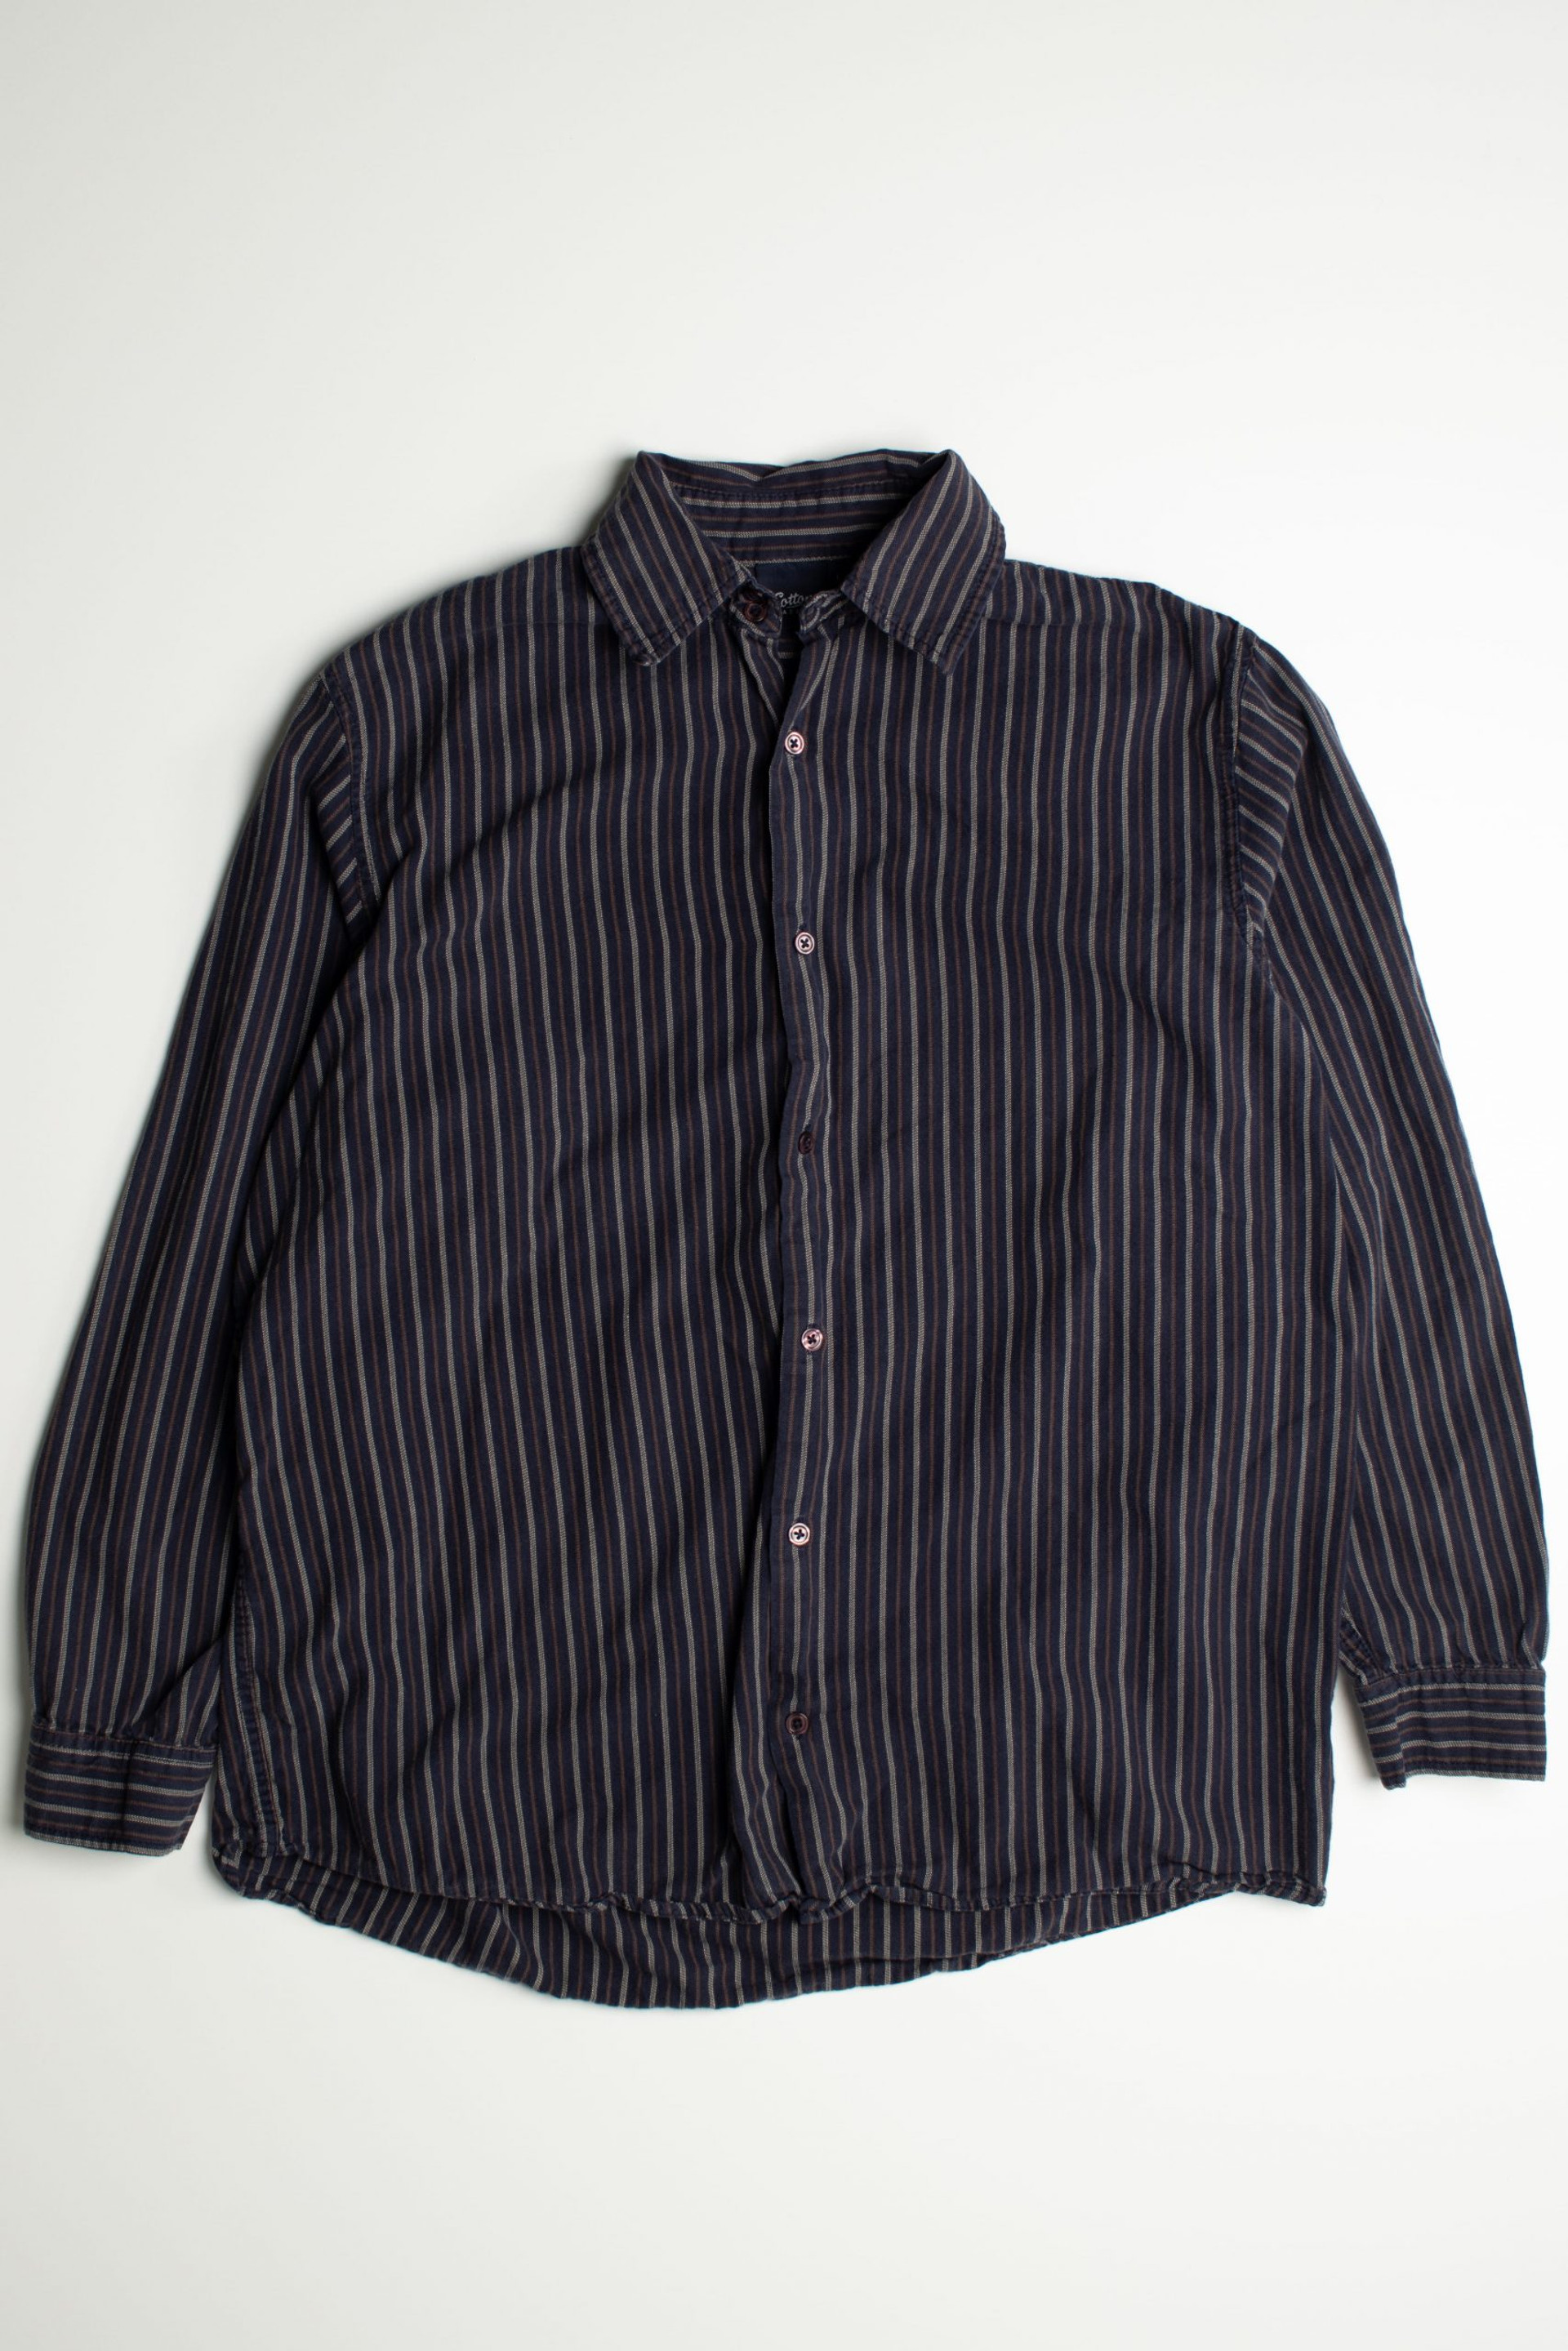 Vintage Cotton Traders Button Up Shirt - Ragstock.com